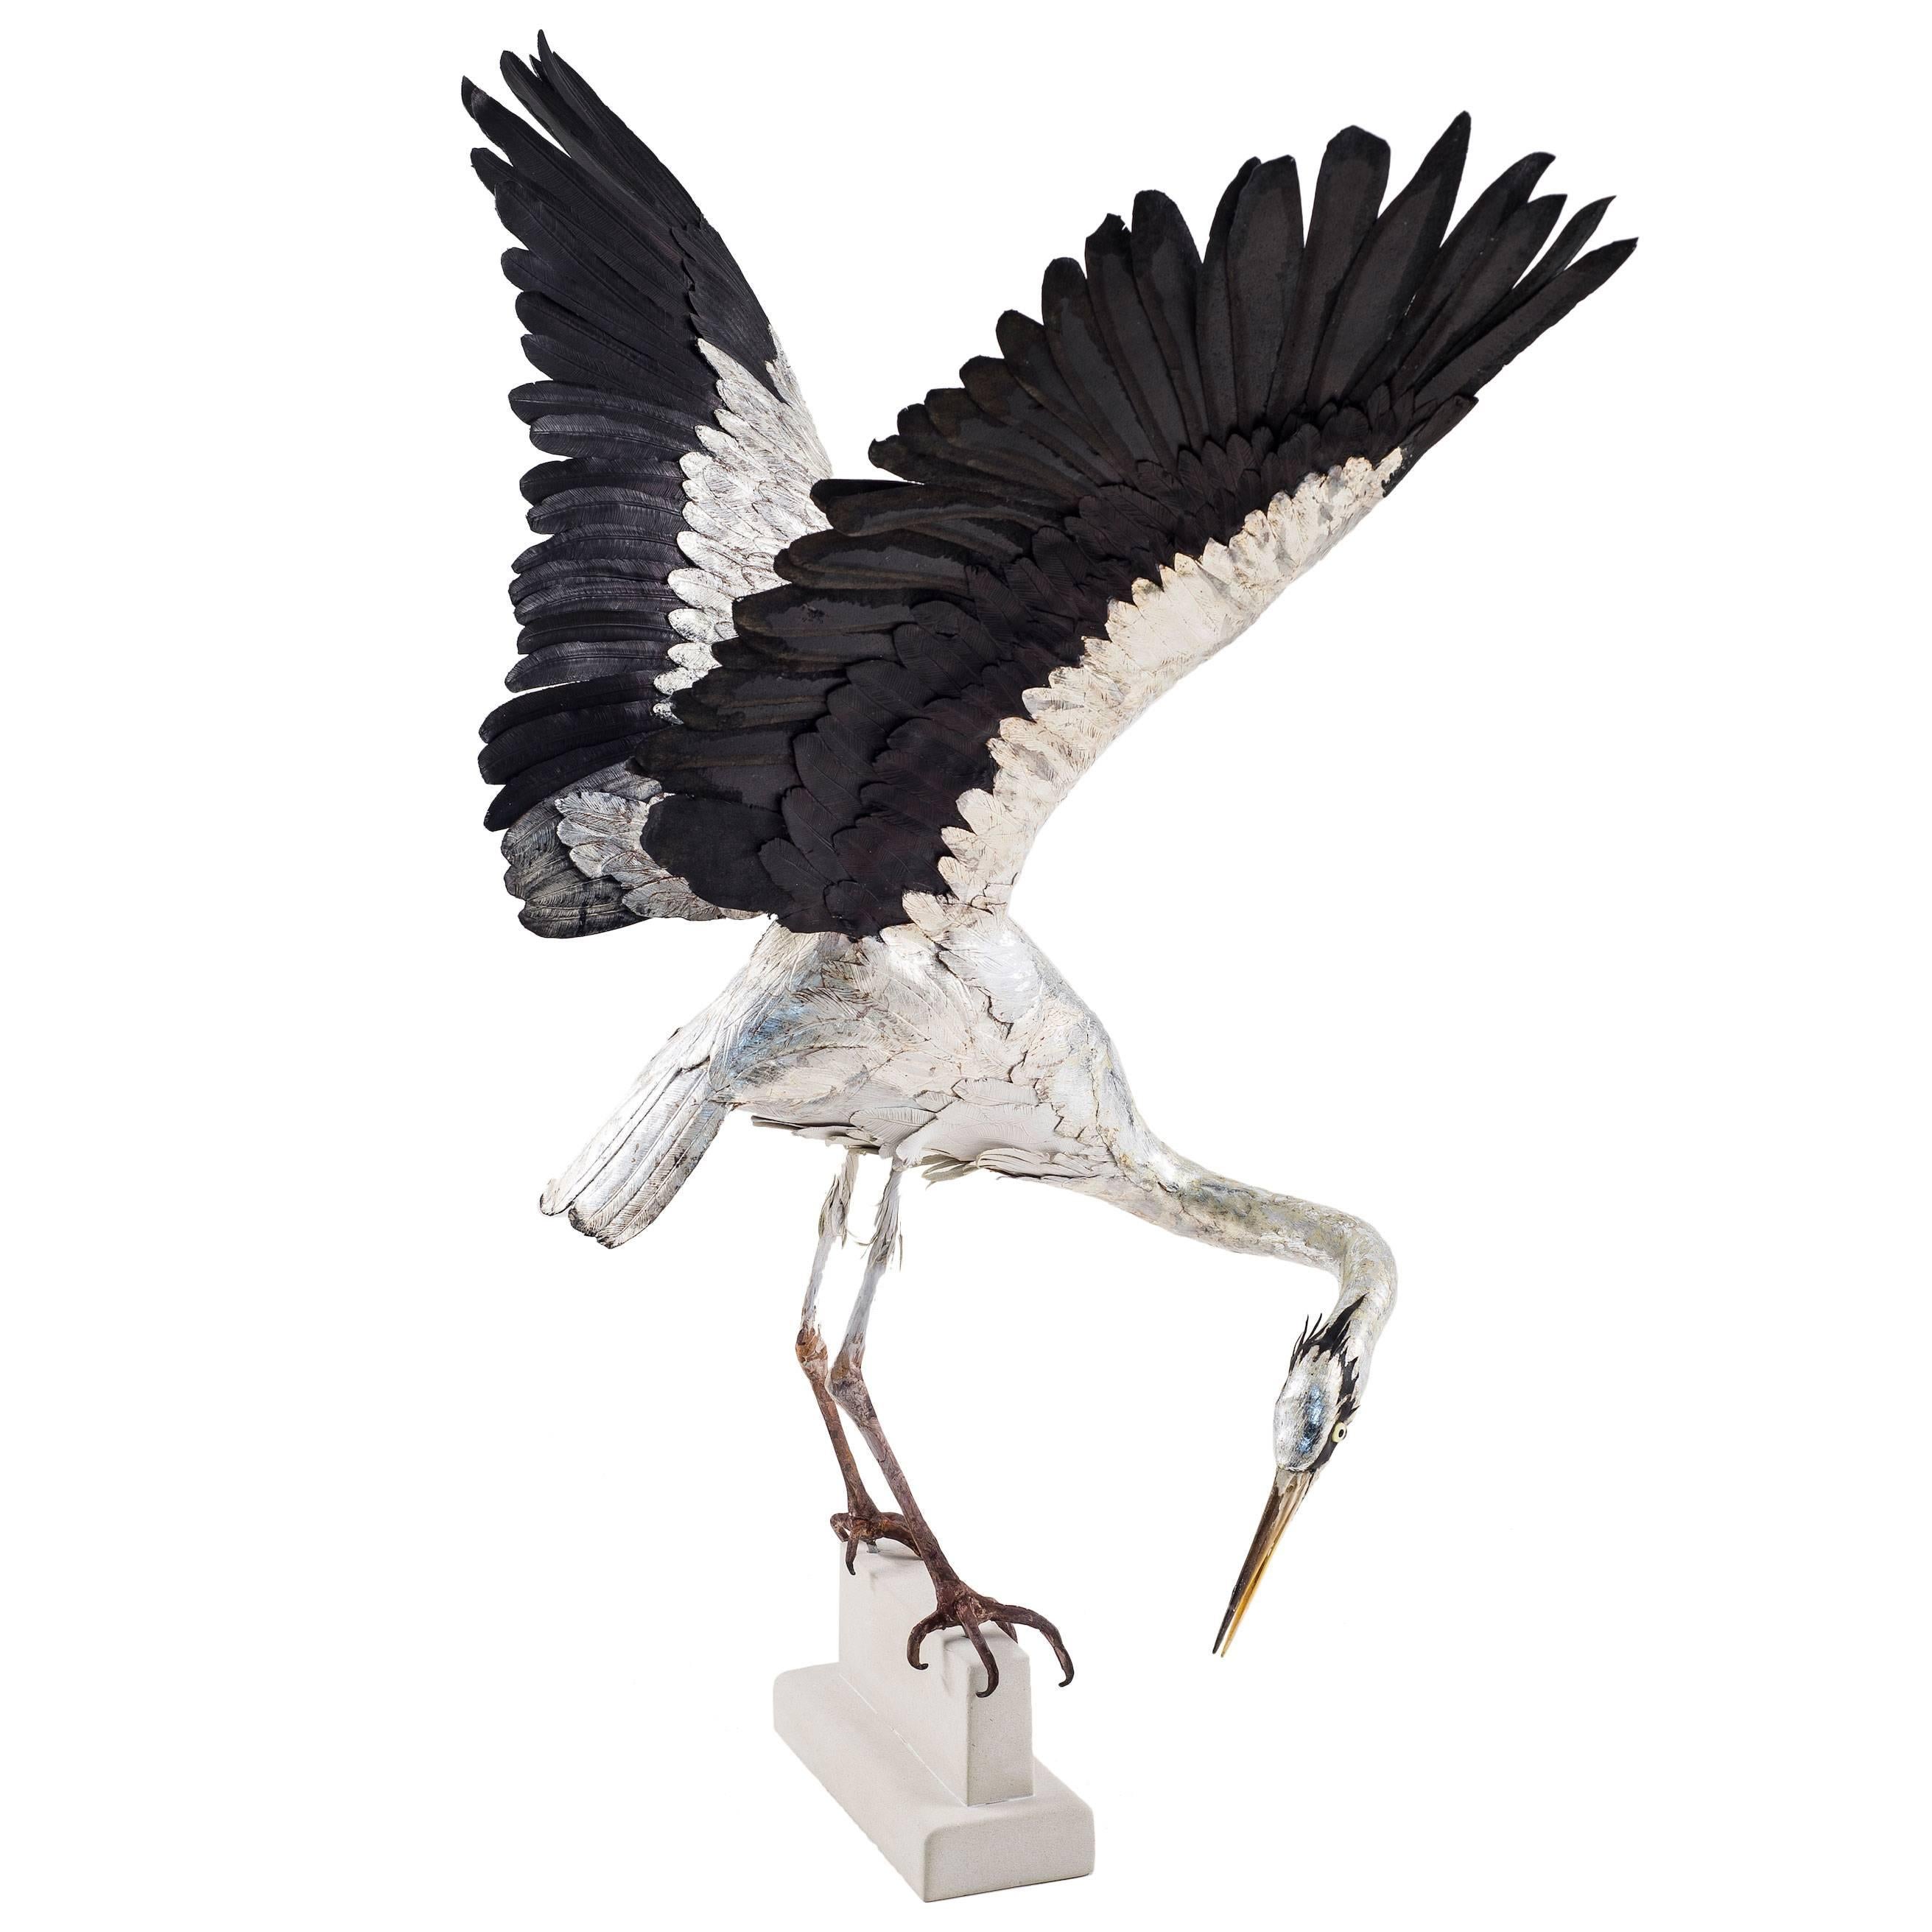 Self Reliance 1 - a life-size heron sculpture made with handworked leather For Sale